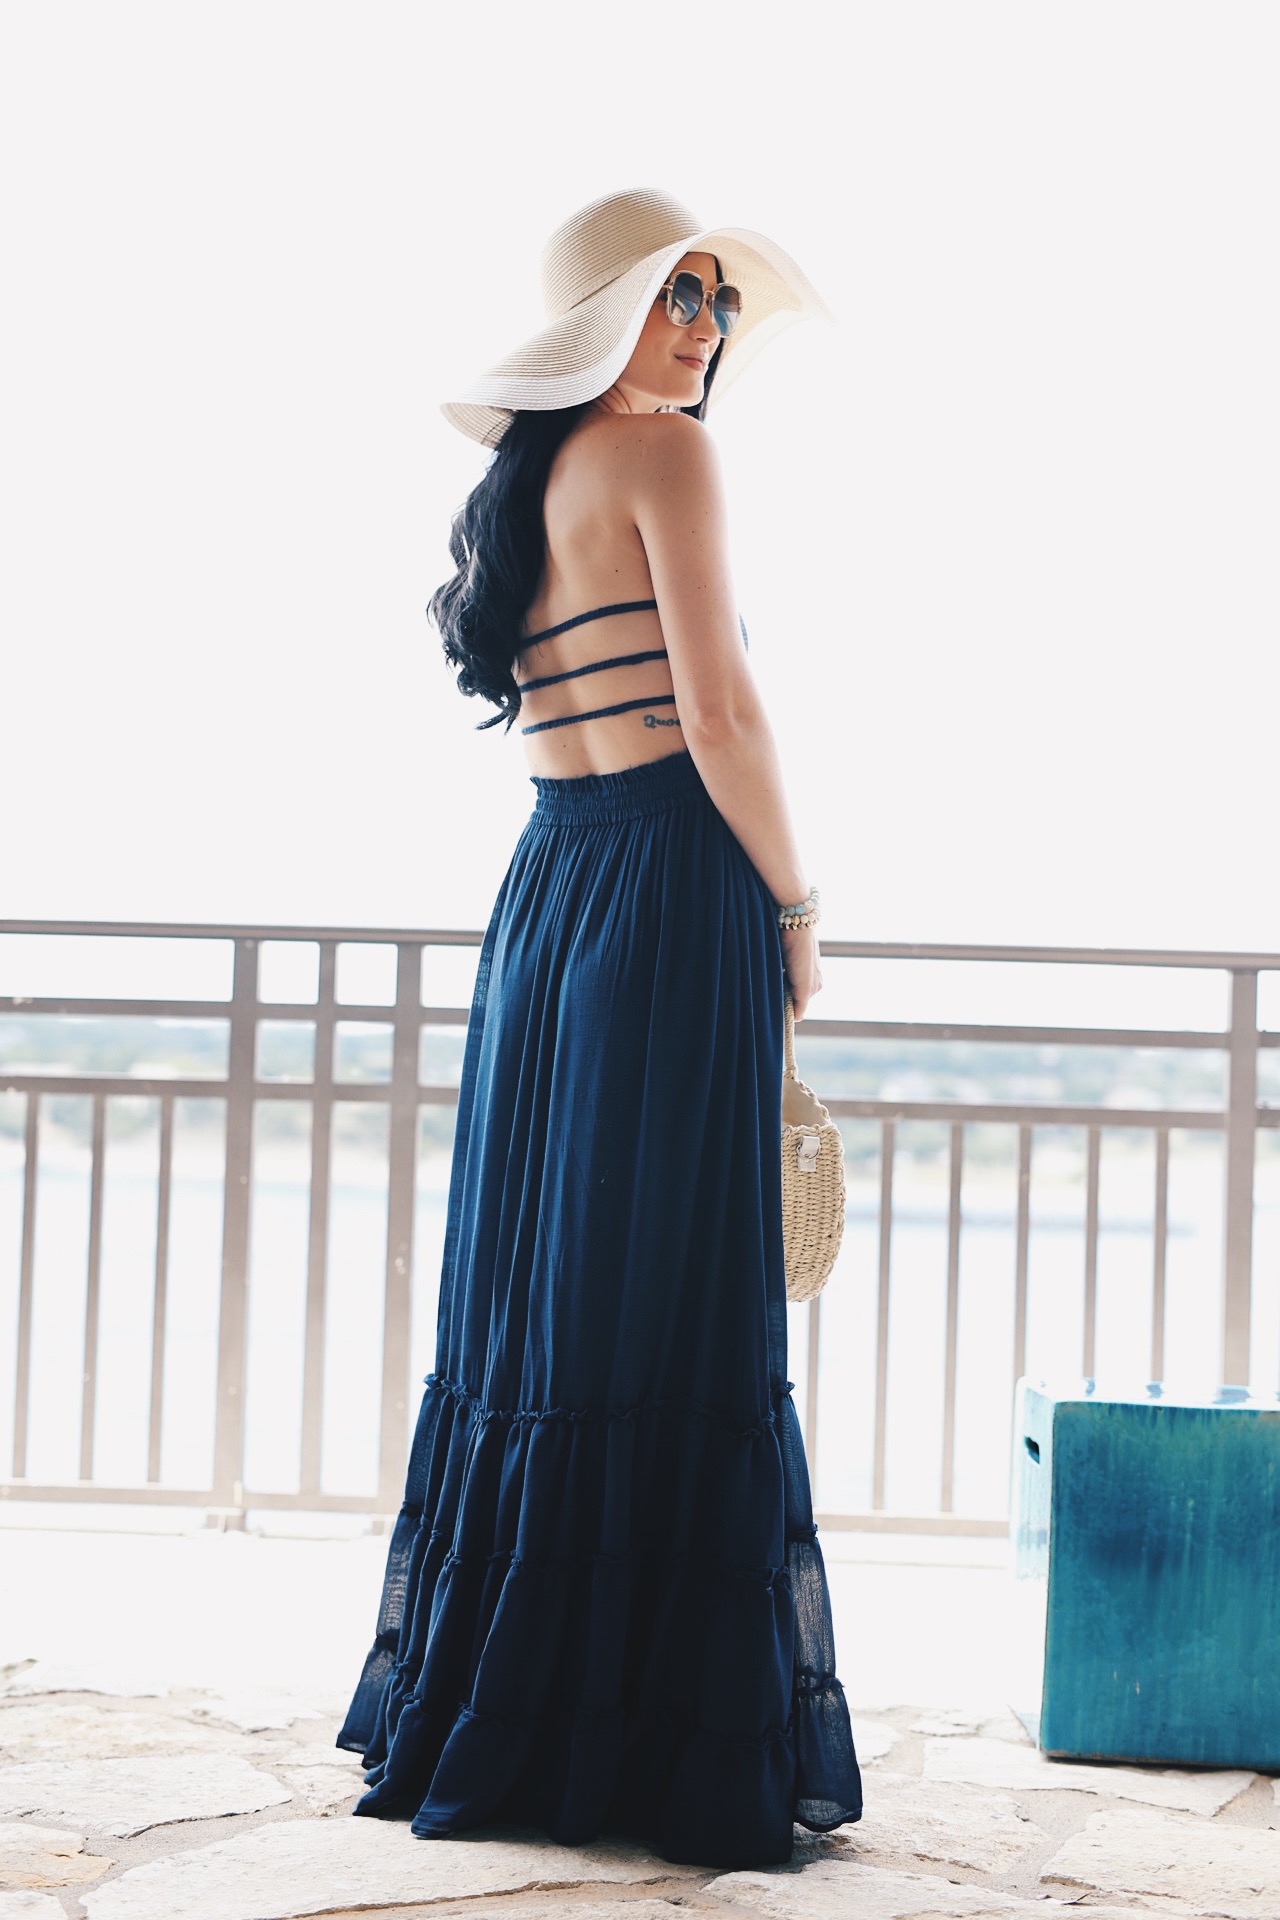 Maxi Dress and Hat | summer style for women | summer fashion for women | summer outfit ideas for women || DTK Austin #fashion #style #womensoutfits #maxidress #summerhat #summerfashion #summerstyle #summeroutfits - {Best Staycation Near Austin - Lakeway Resort & Spa} by popular Austin blogger, Dressed to Kill